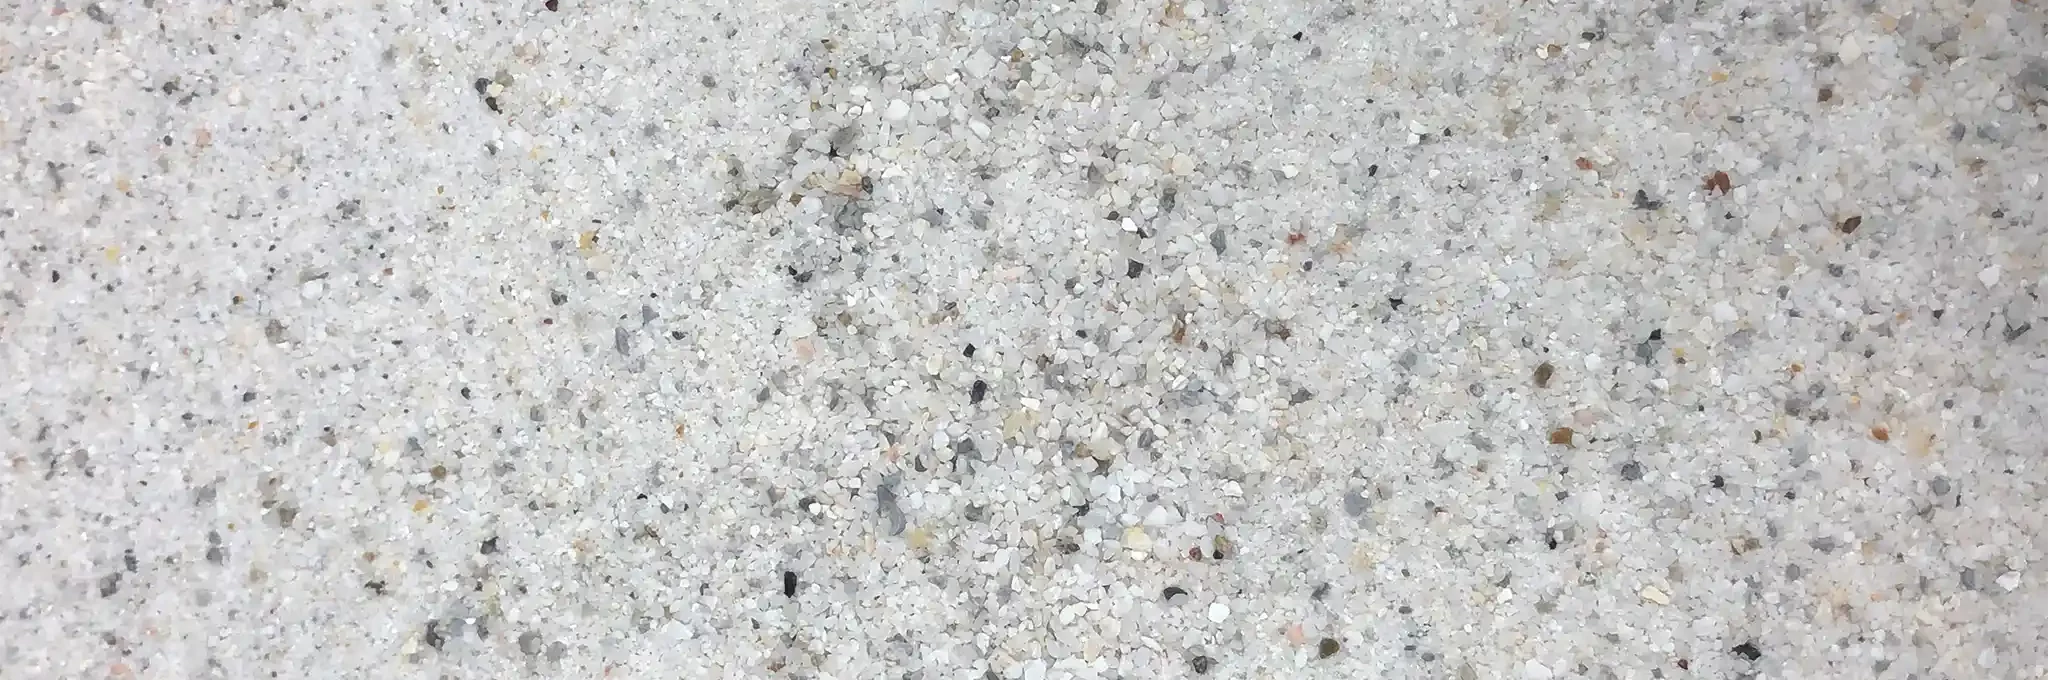 A close-up view of Premier White sand.